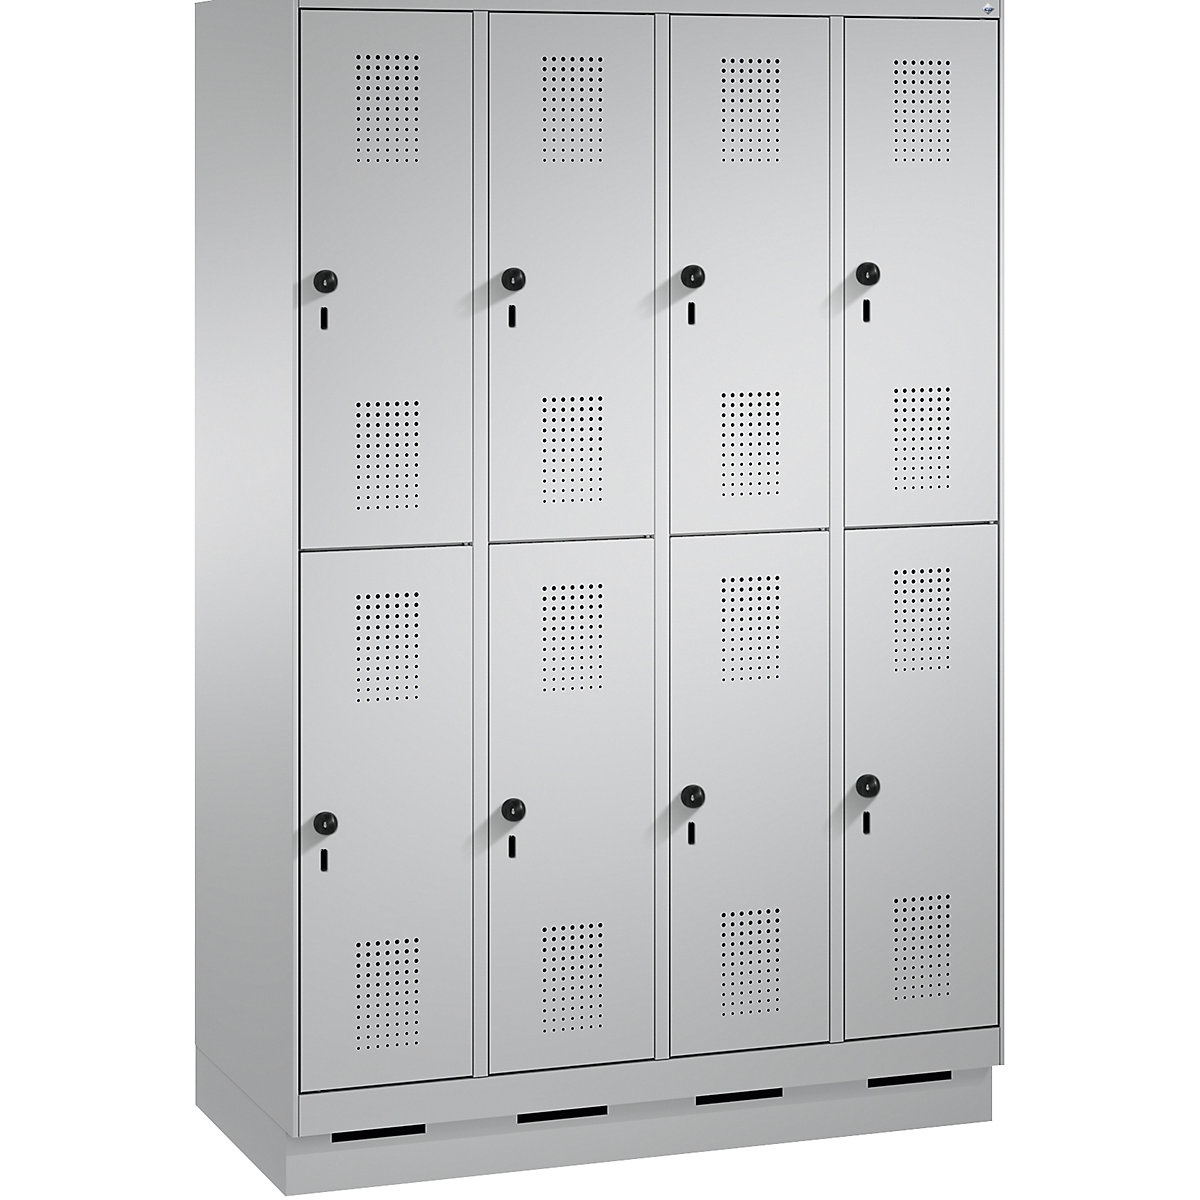 EVOLO cloakroom locker, double tier, with plinth – C+P, 4 compartments, 2 shelf compartments each, compartment width 300 mm, white aluminium / white aluminium-3